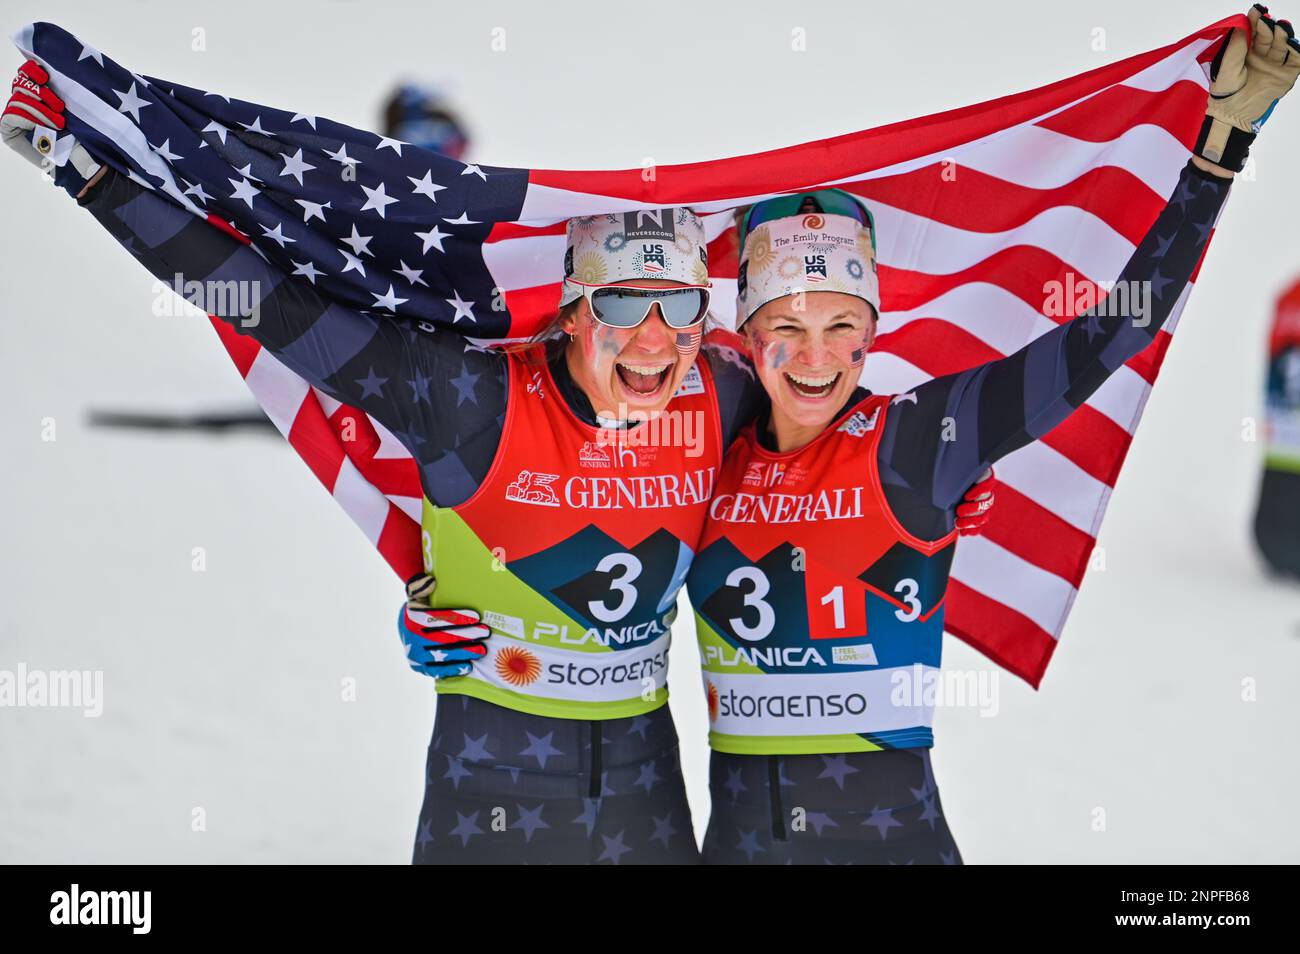 Planica, Slovenia. 26th Feb, 2023. Americans Julia Kern, left, and Jessie Diggins celebrate after taking the bronze medal in the team sprint at the 2023 FIS World Nordic Ski Championships in Planica, Slovenia, February 26, 2023. The two have been teammates, friends and roommates on the World Cup ski circuit for eight years. John Lazenby/Alamy Live News Credit: John Candler Lazenby/Alamy Live News Stock Photo